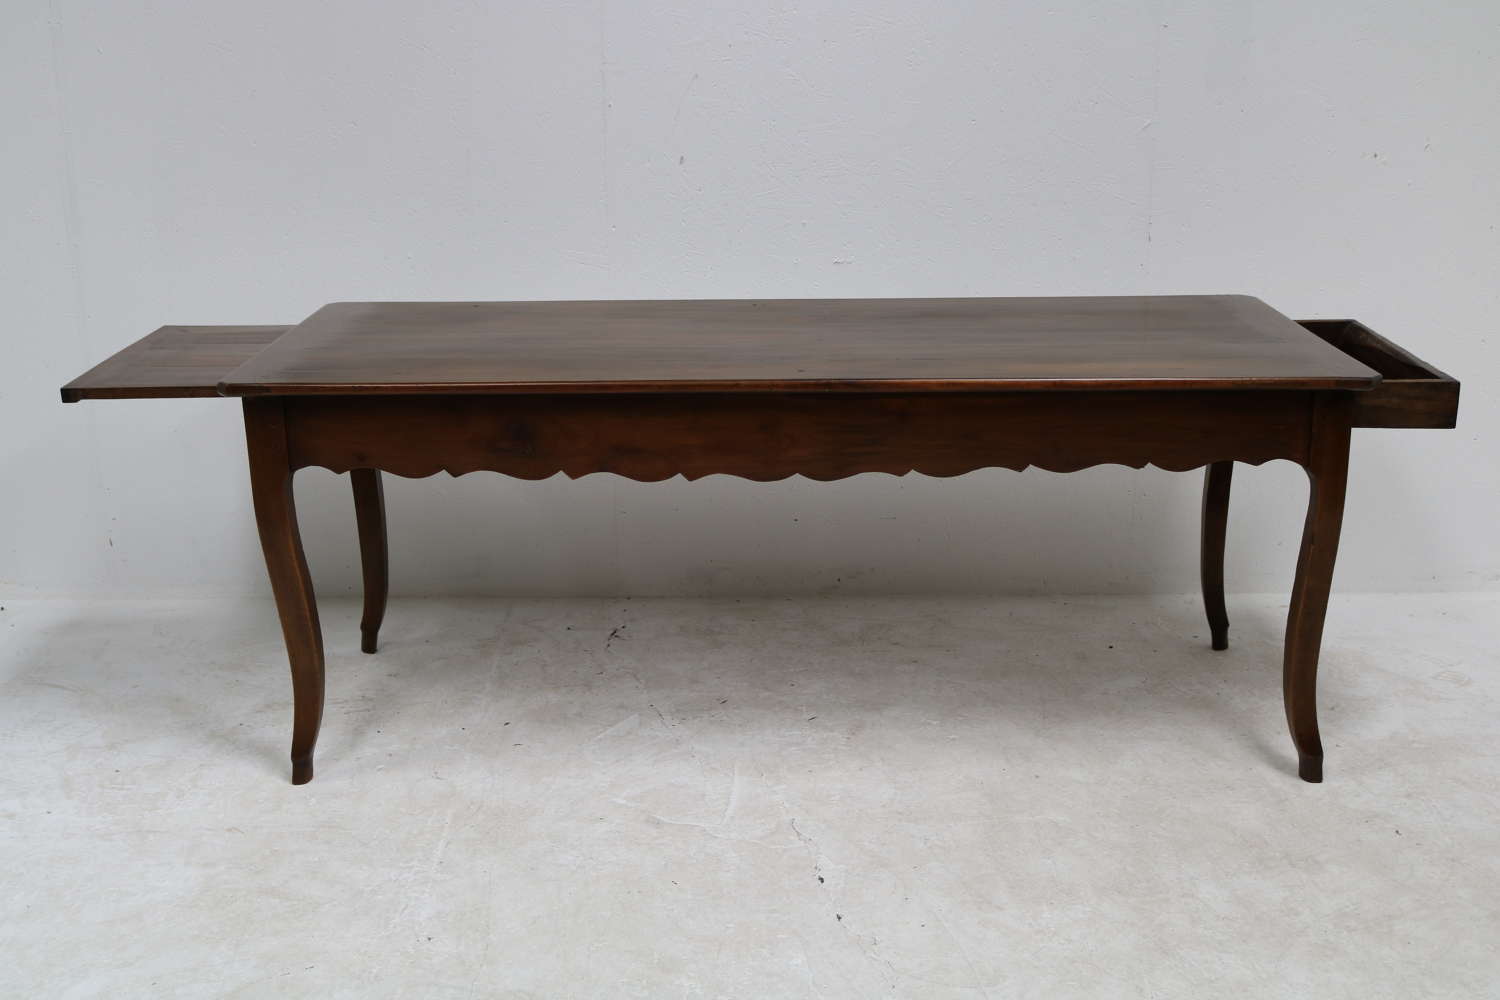 A French cherry wood cabriole leg dining table with breadslide ends